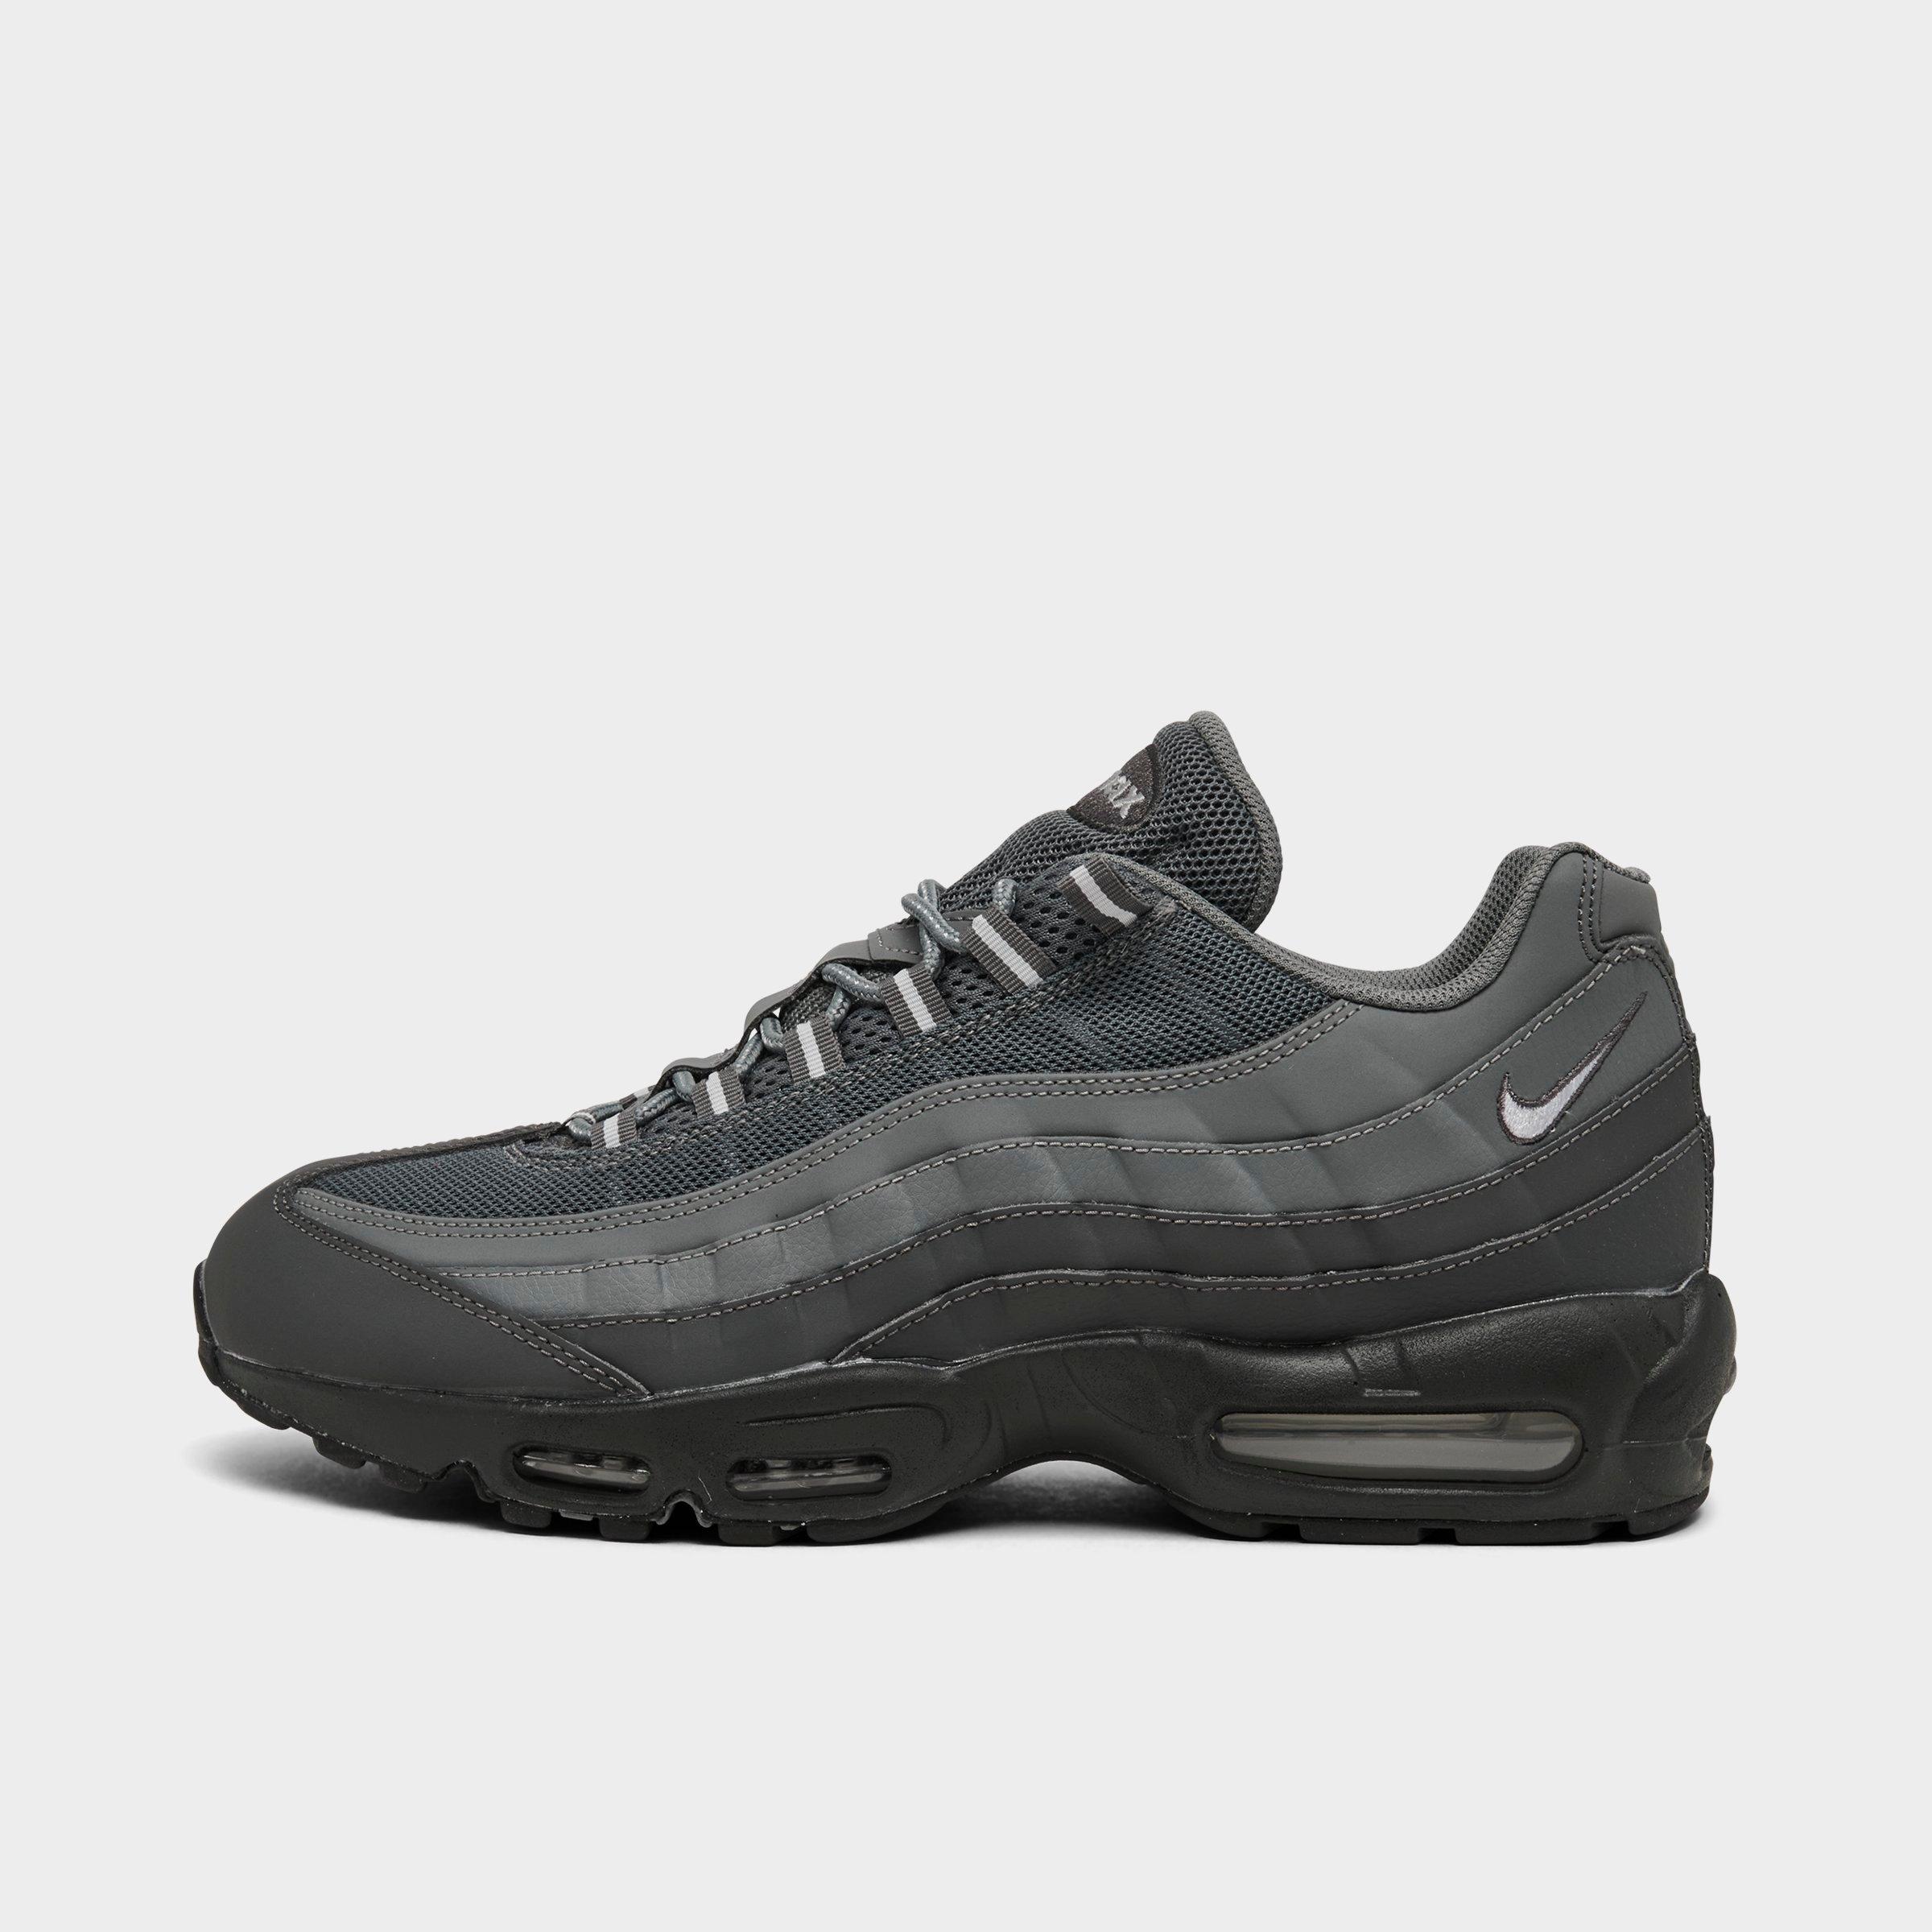 Nike Air Max 95 Shoes u0026 Sneakers | Finish Line